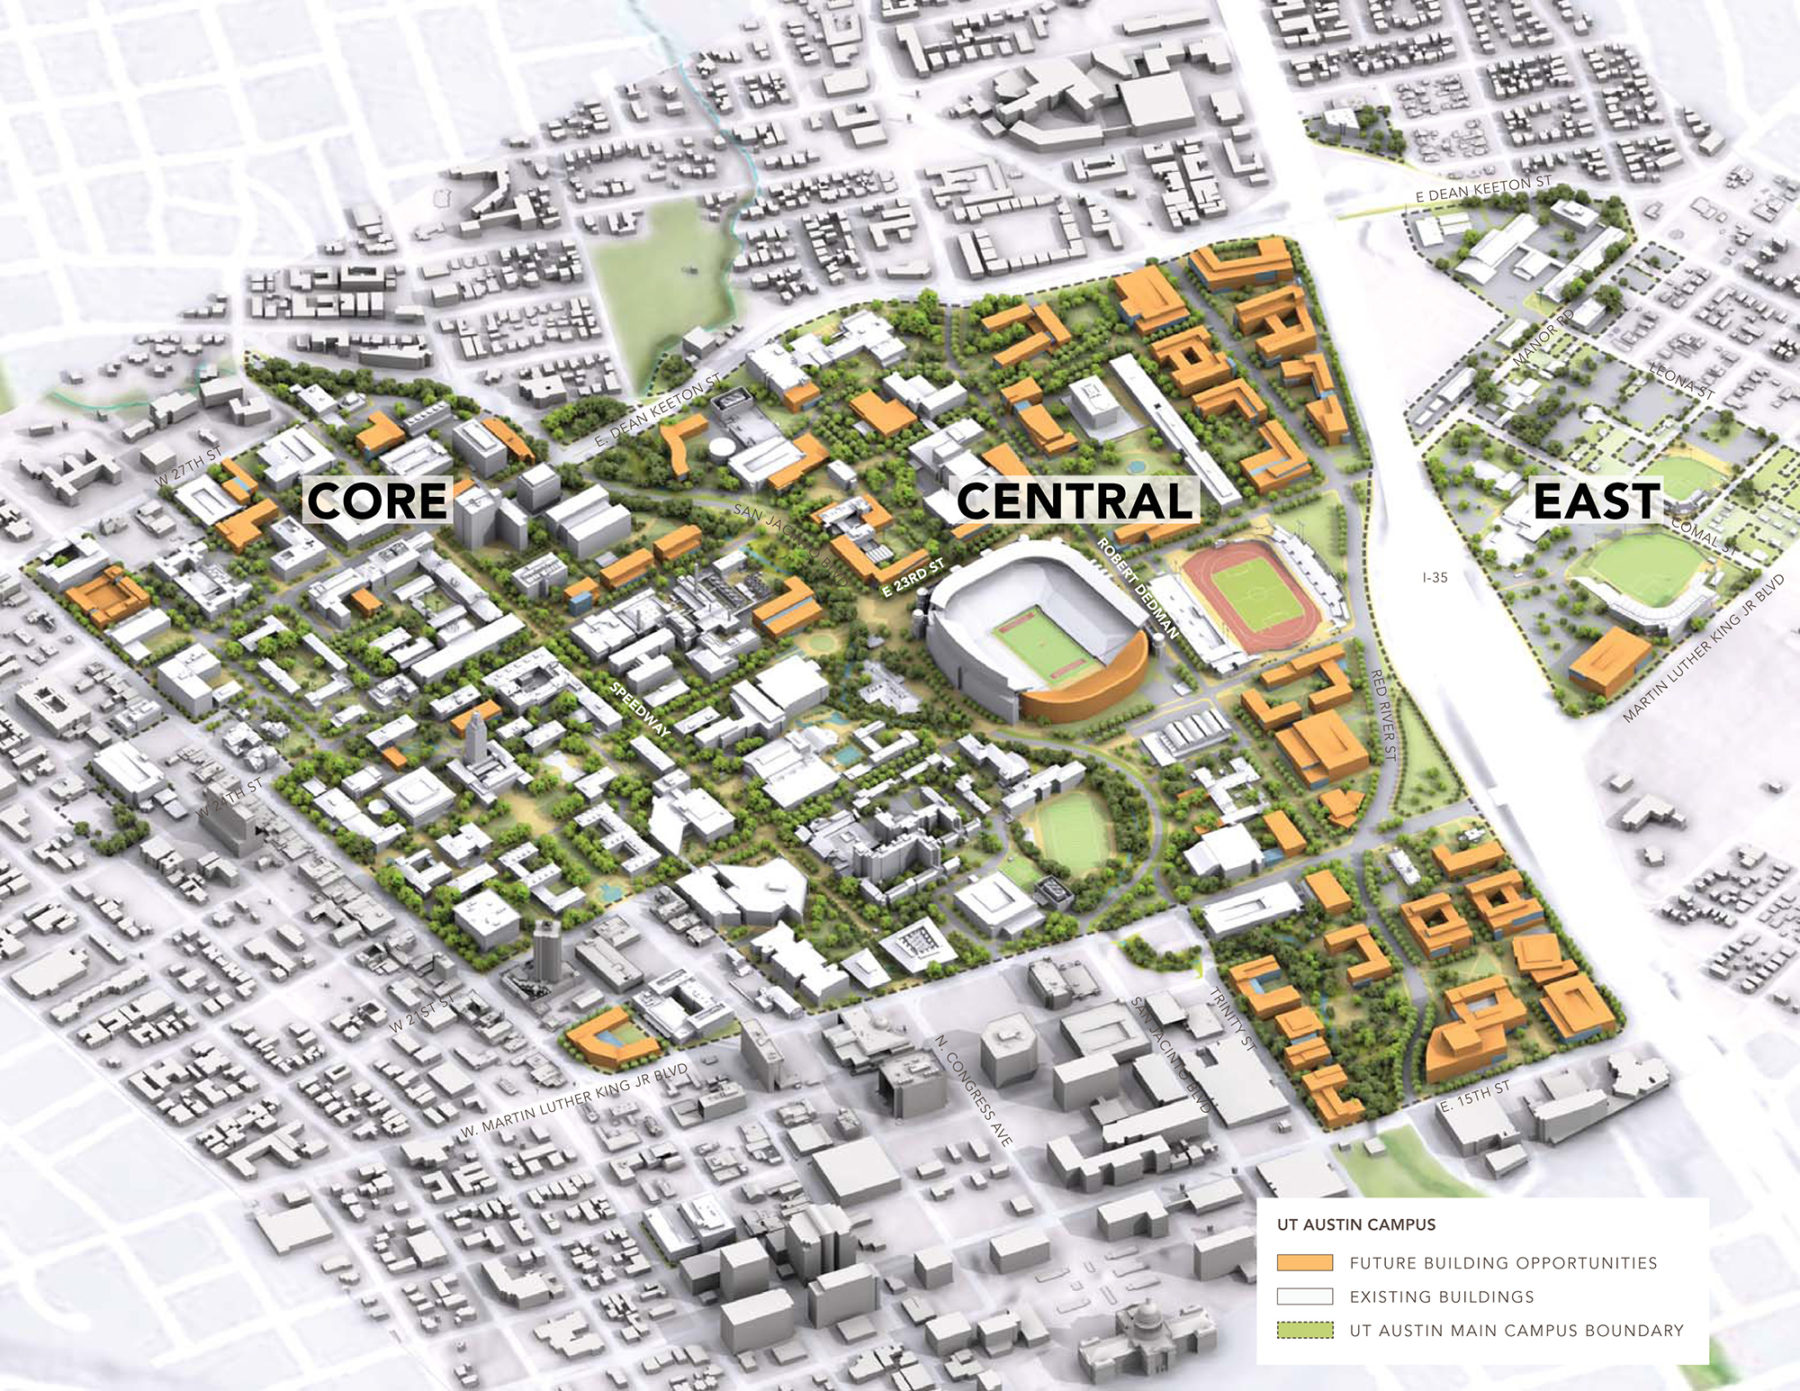 Aerial axon of campus with the different zones labeled